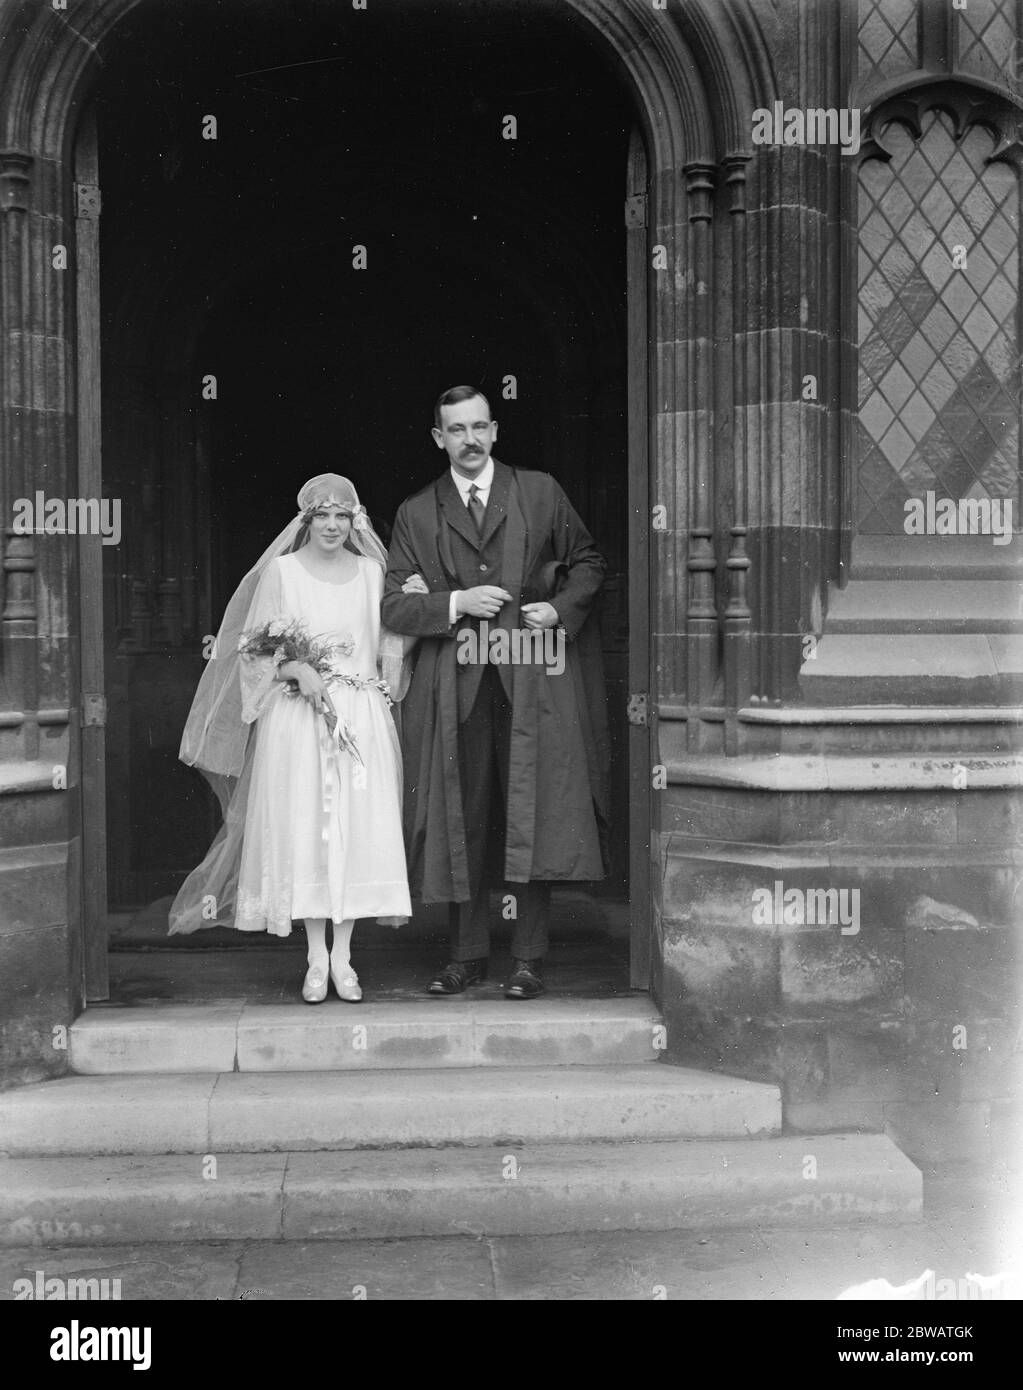 Wedding Miss Eileen Mary Rutherford the 20 year old daughter of Sir Ernest Rutherford Cavendish , Professor of physics at Cambridge University and Mr Ralph Howard Fowler a brilliant young mathmatical don were married in Trinity College Chapel Cambridge The Bride and Bridegroom leaving after the ceremony 6 December 1921 Stock Photo